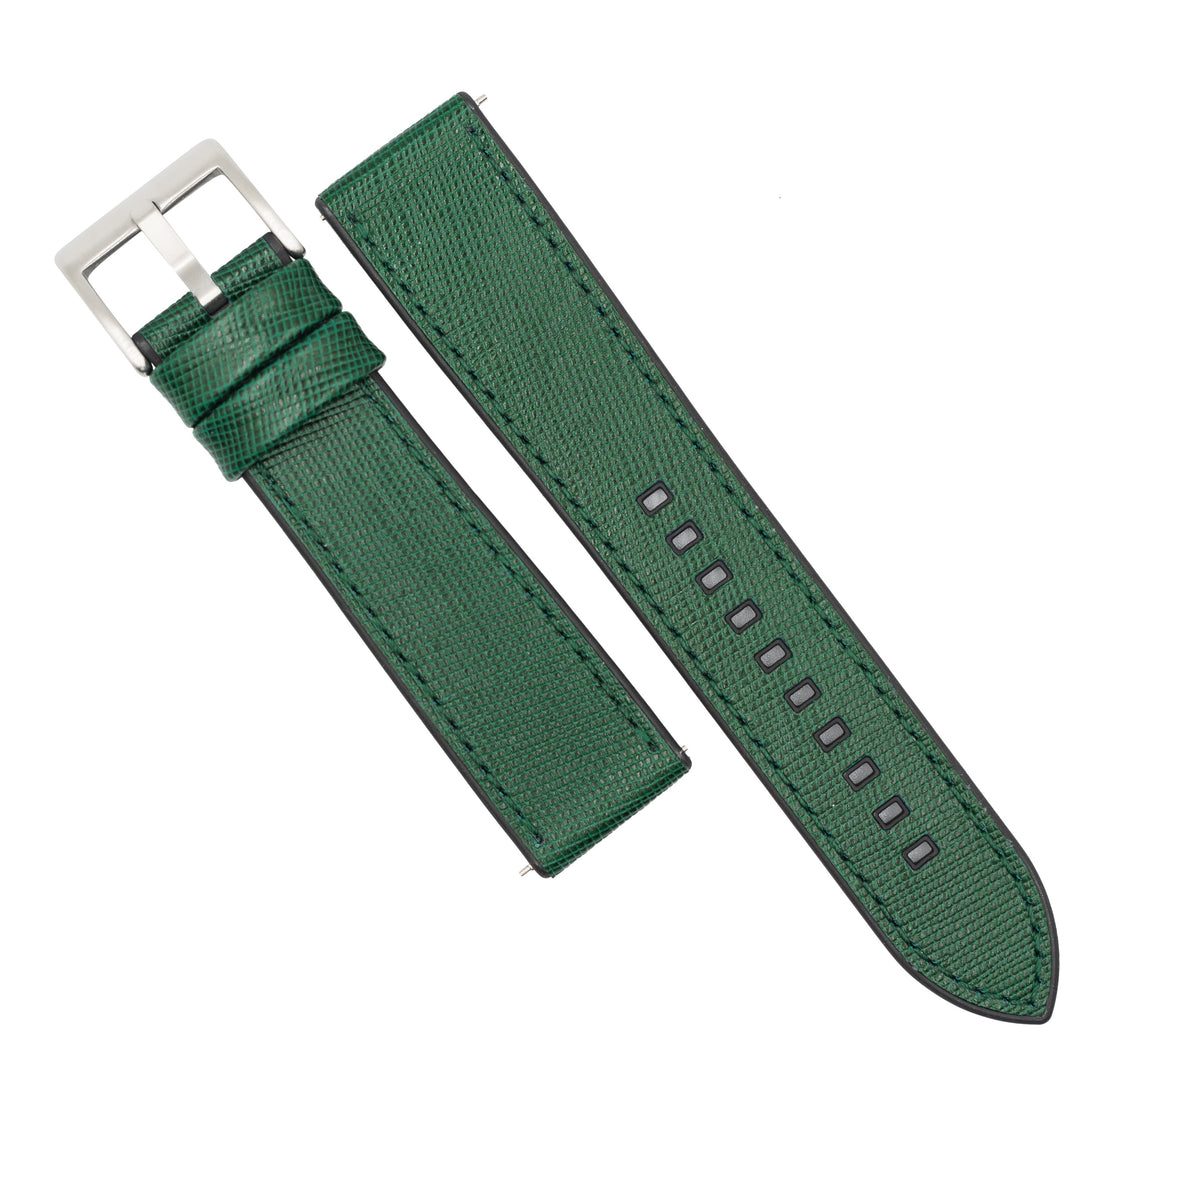 Performax Saffiano Leather FKM Rubber Hybrid Strap in Green (20mm) - Nomad Watch Works MY